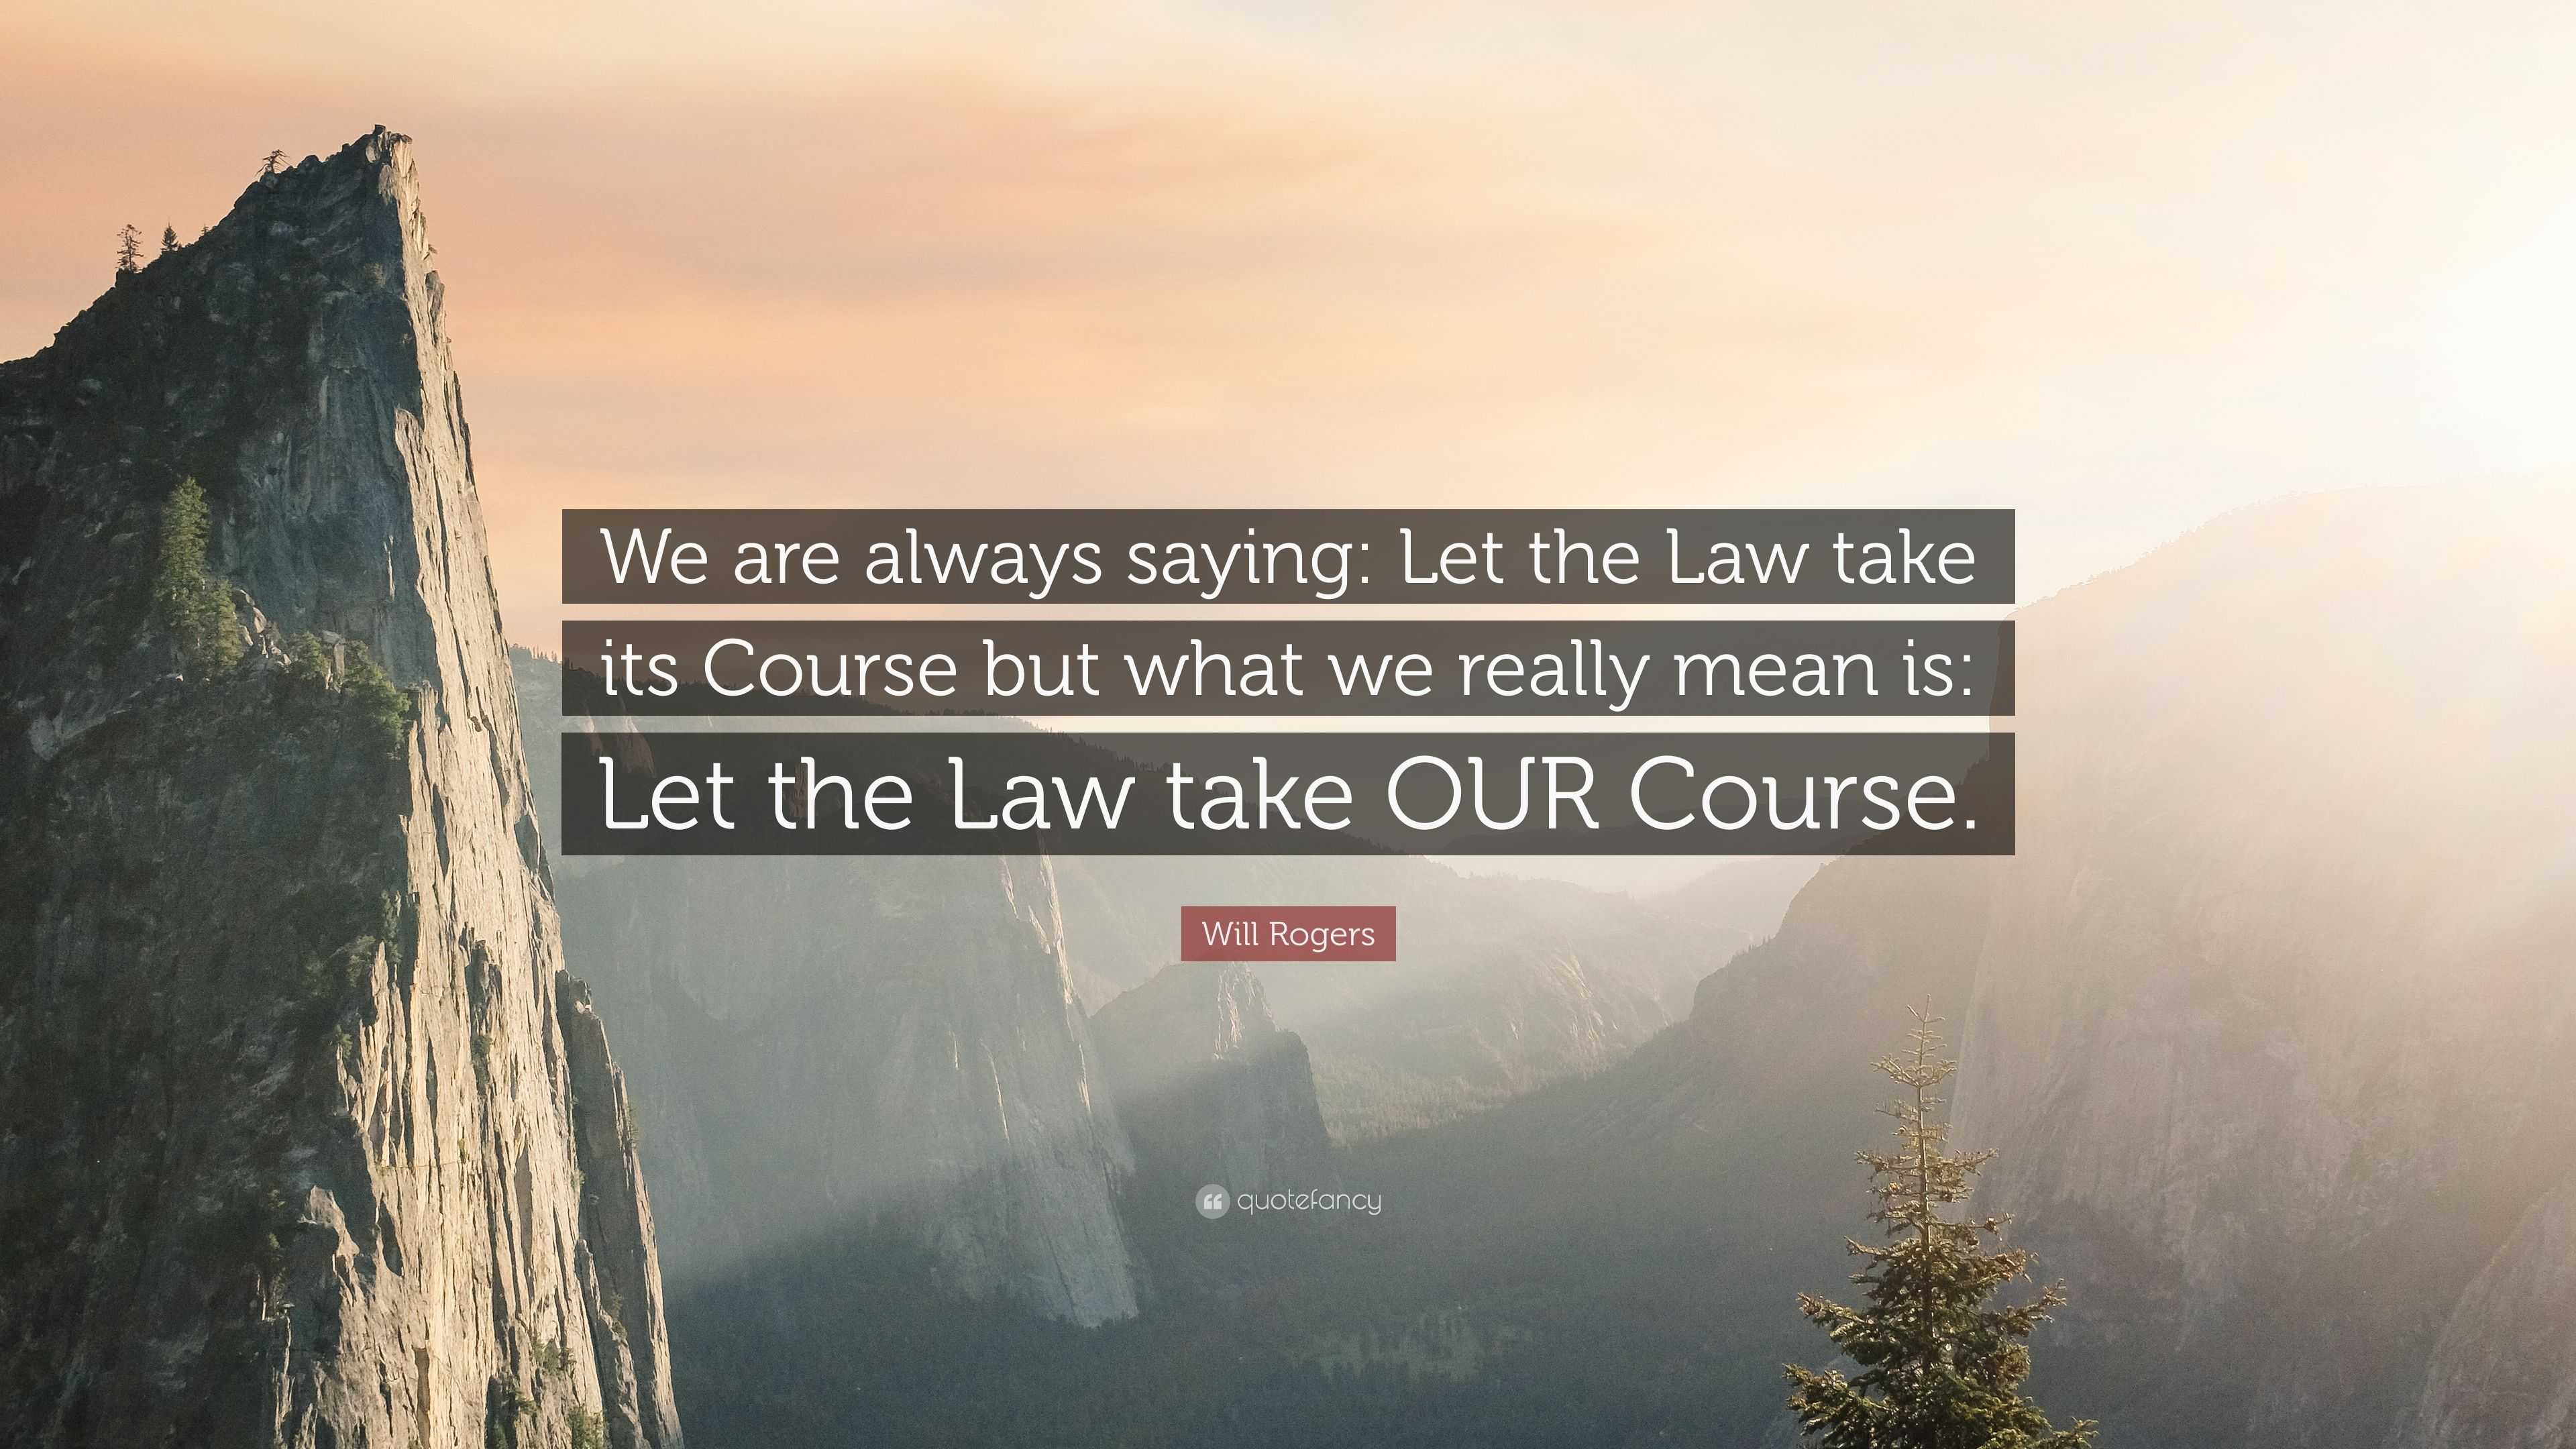 Will Rogers Quote: “We always Let the Law its Course but what